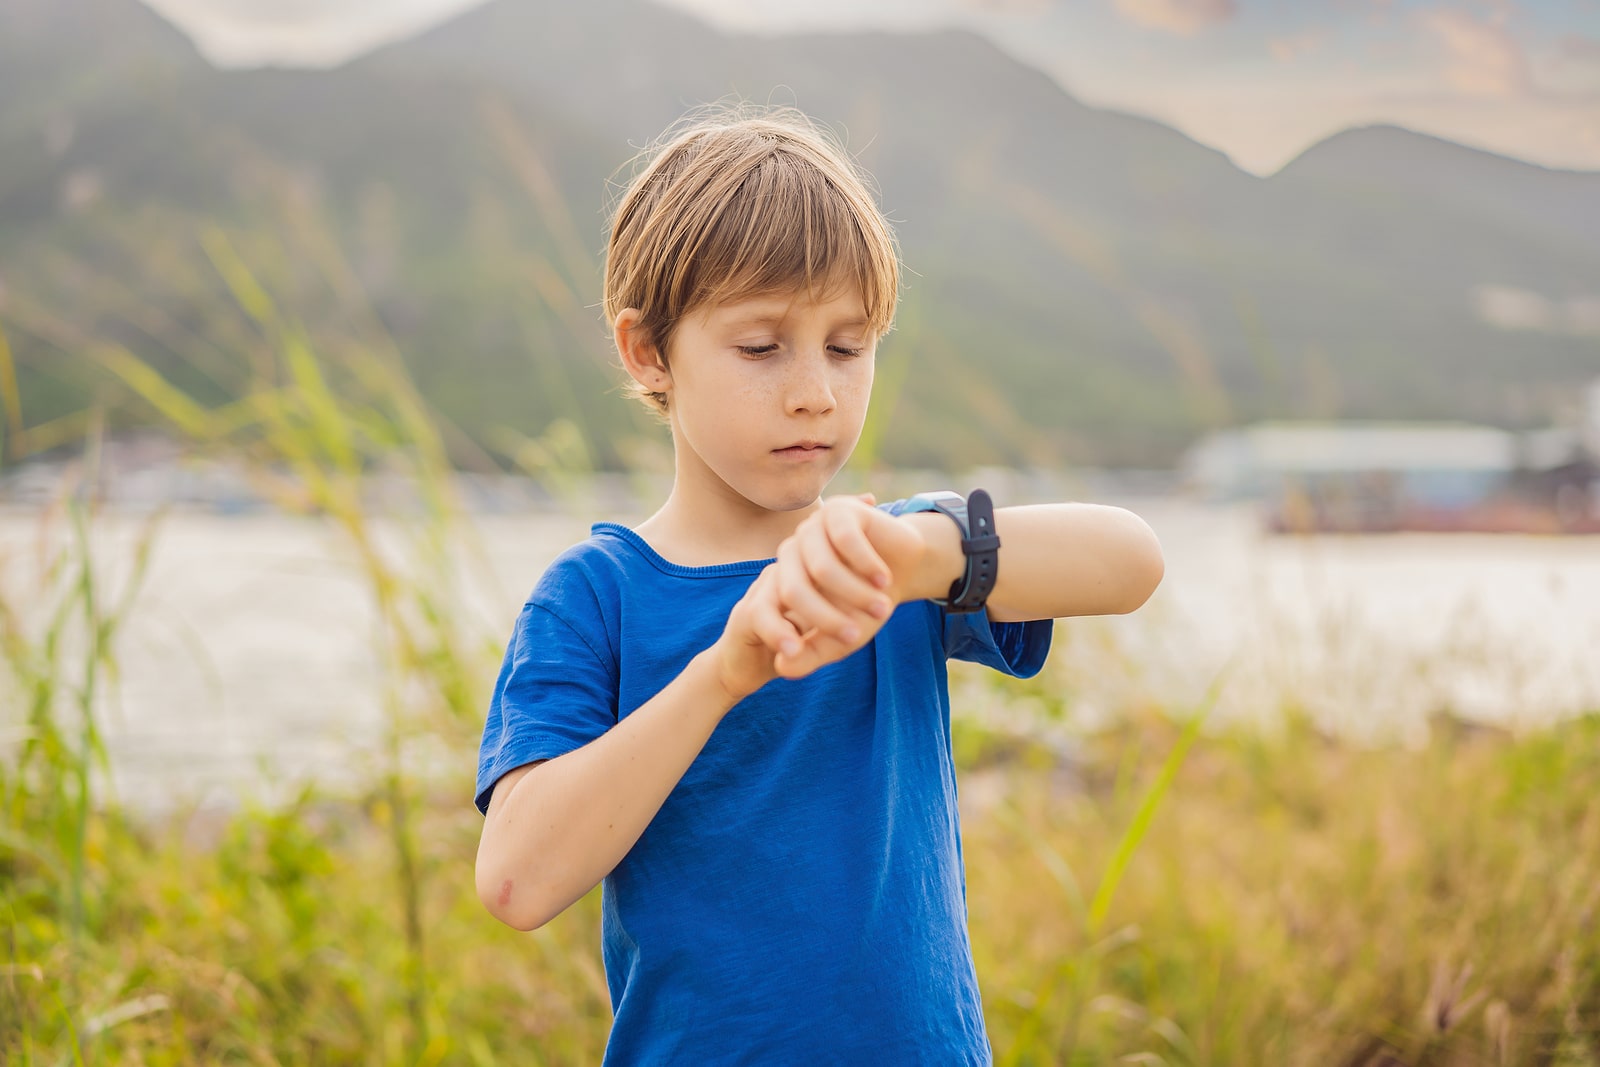 Boy Uses Kids Smart Watch Outdoor Against The Background Of The